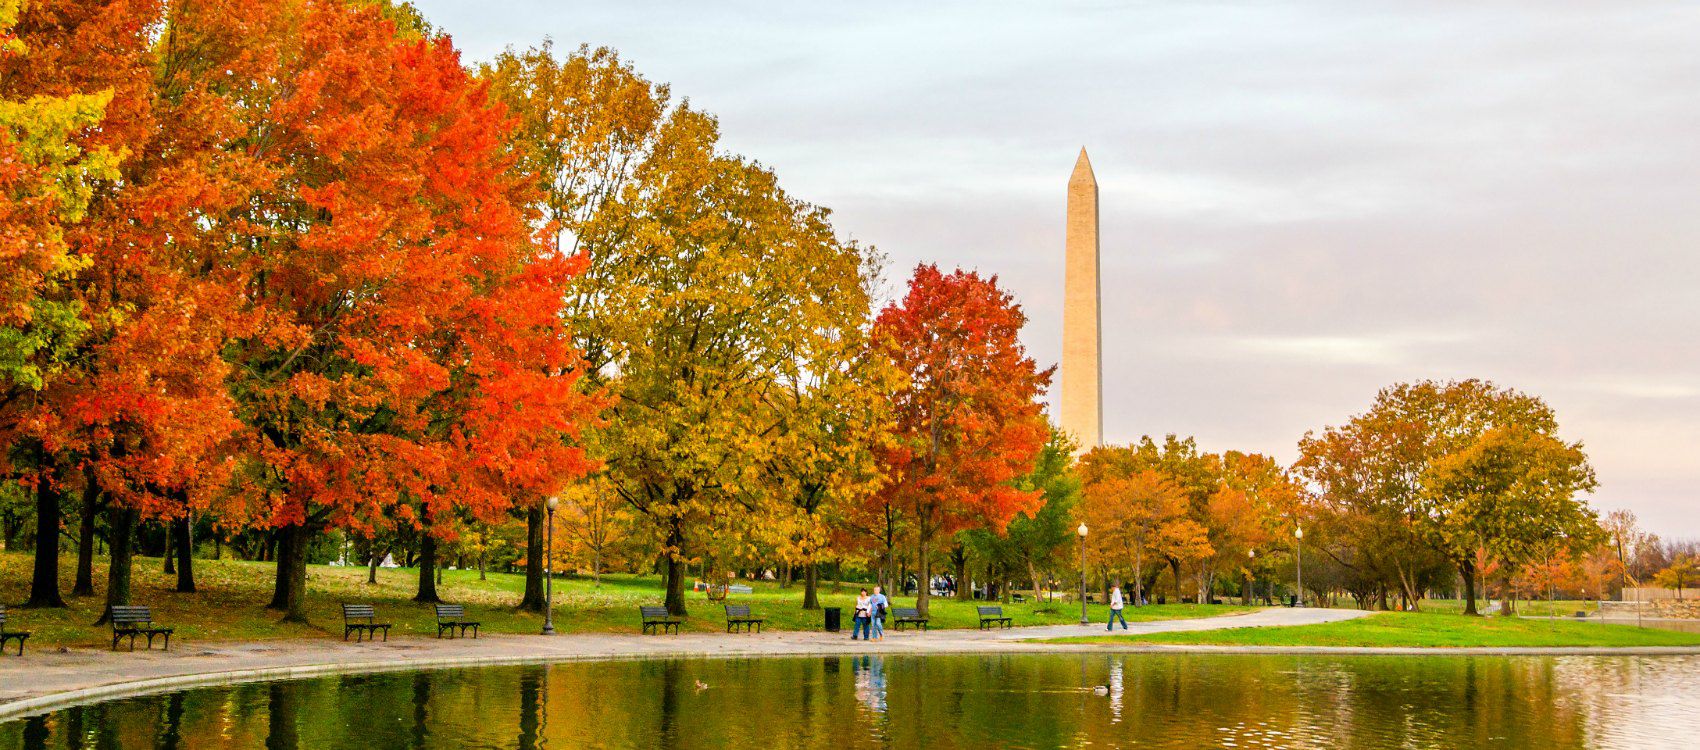 Washington Monument with fall foliage on nearby trees